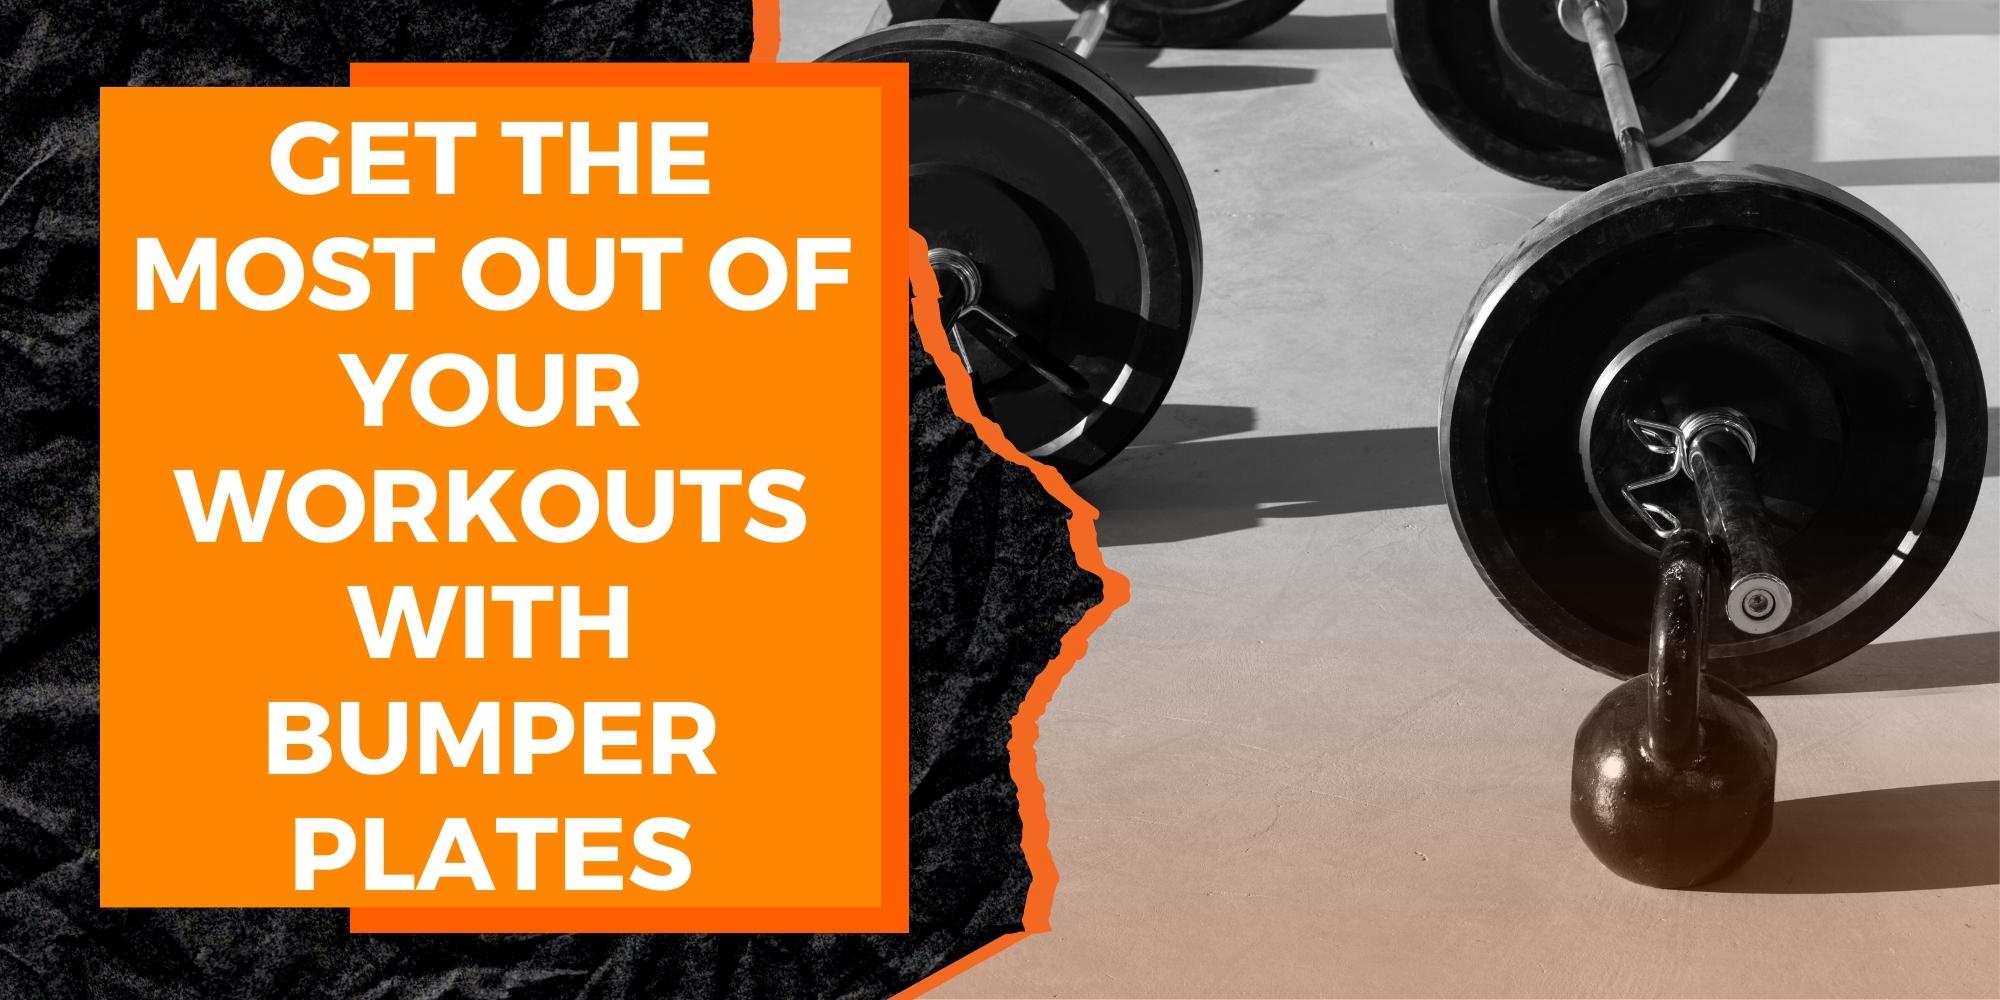 Get the Most Out of Your Workouts with Bumper Plates